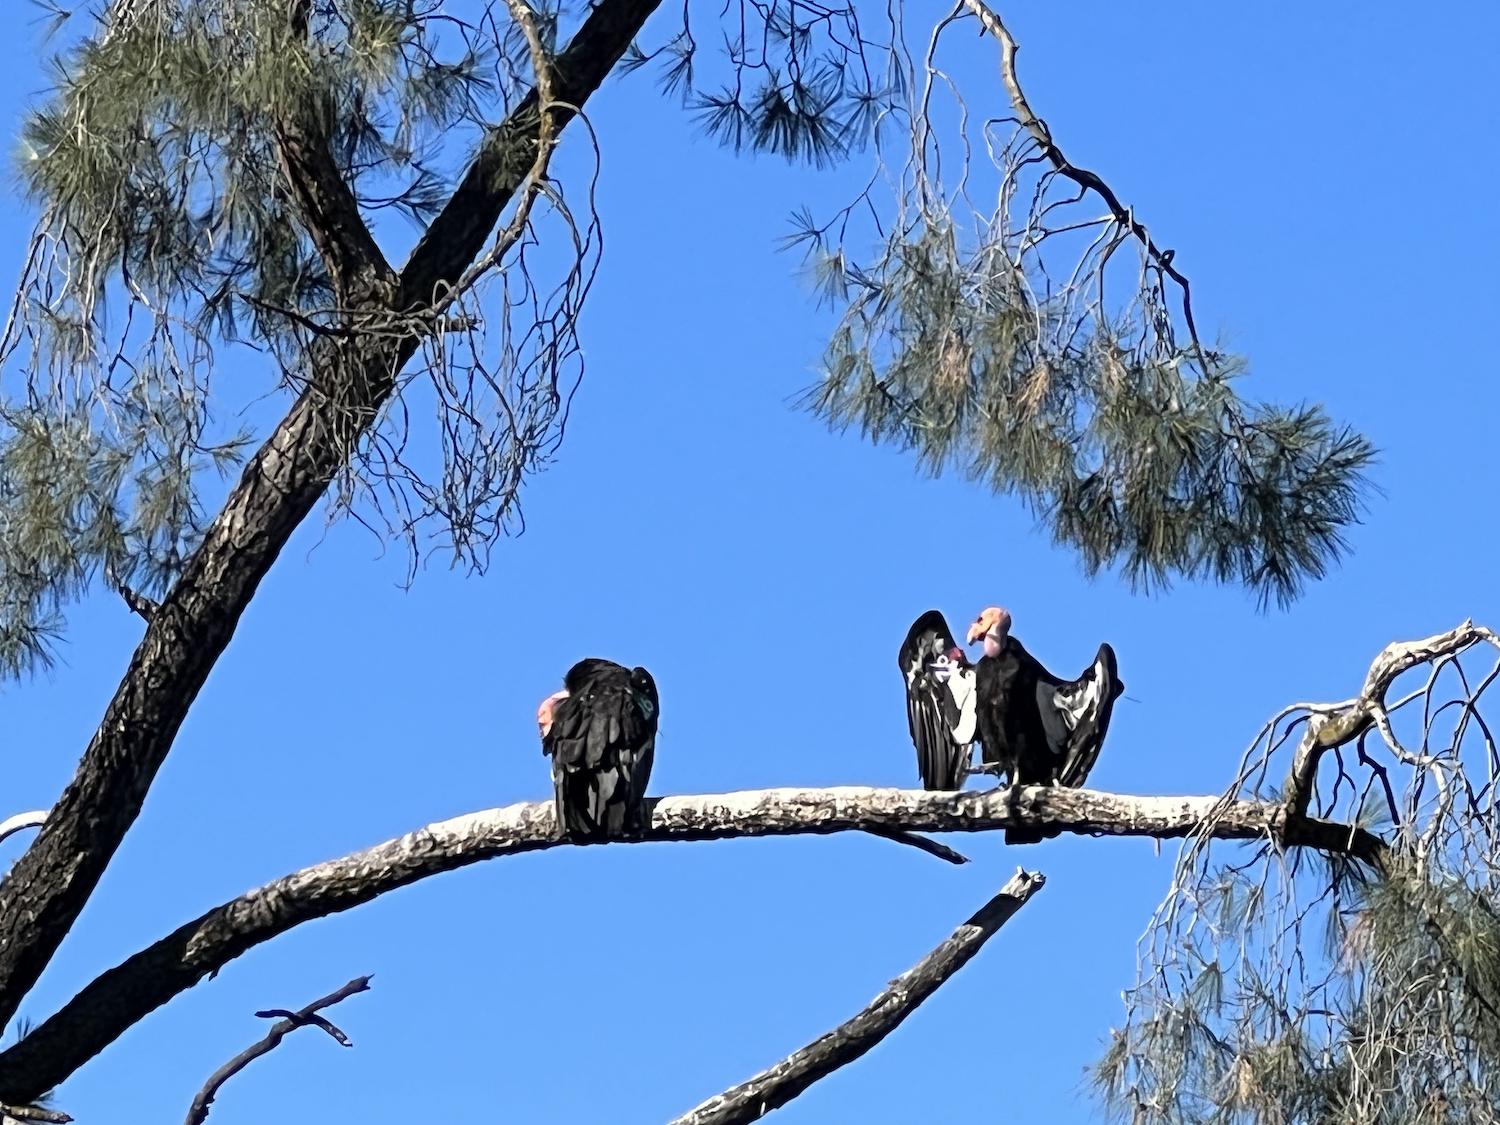 Three condors perched high overhead in the trees, oblivious to us/Valerie Lapin